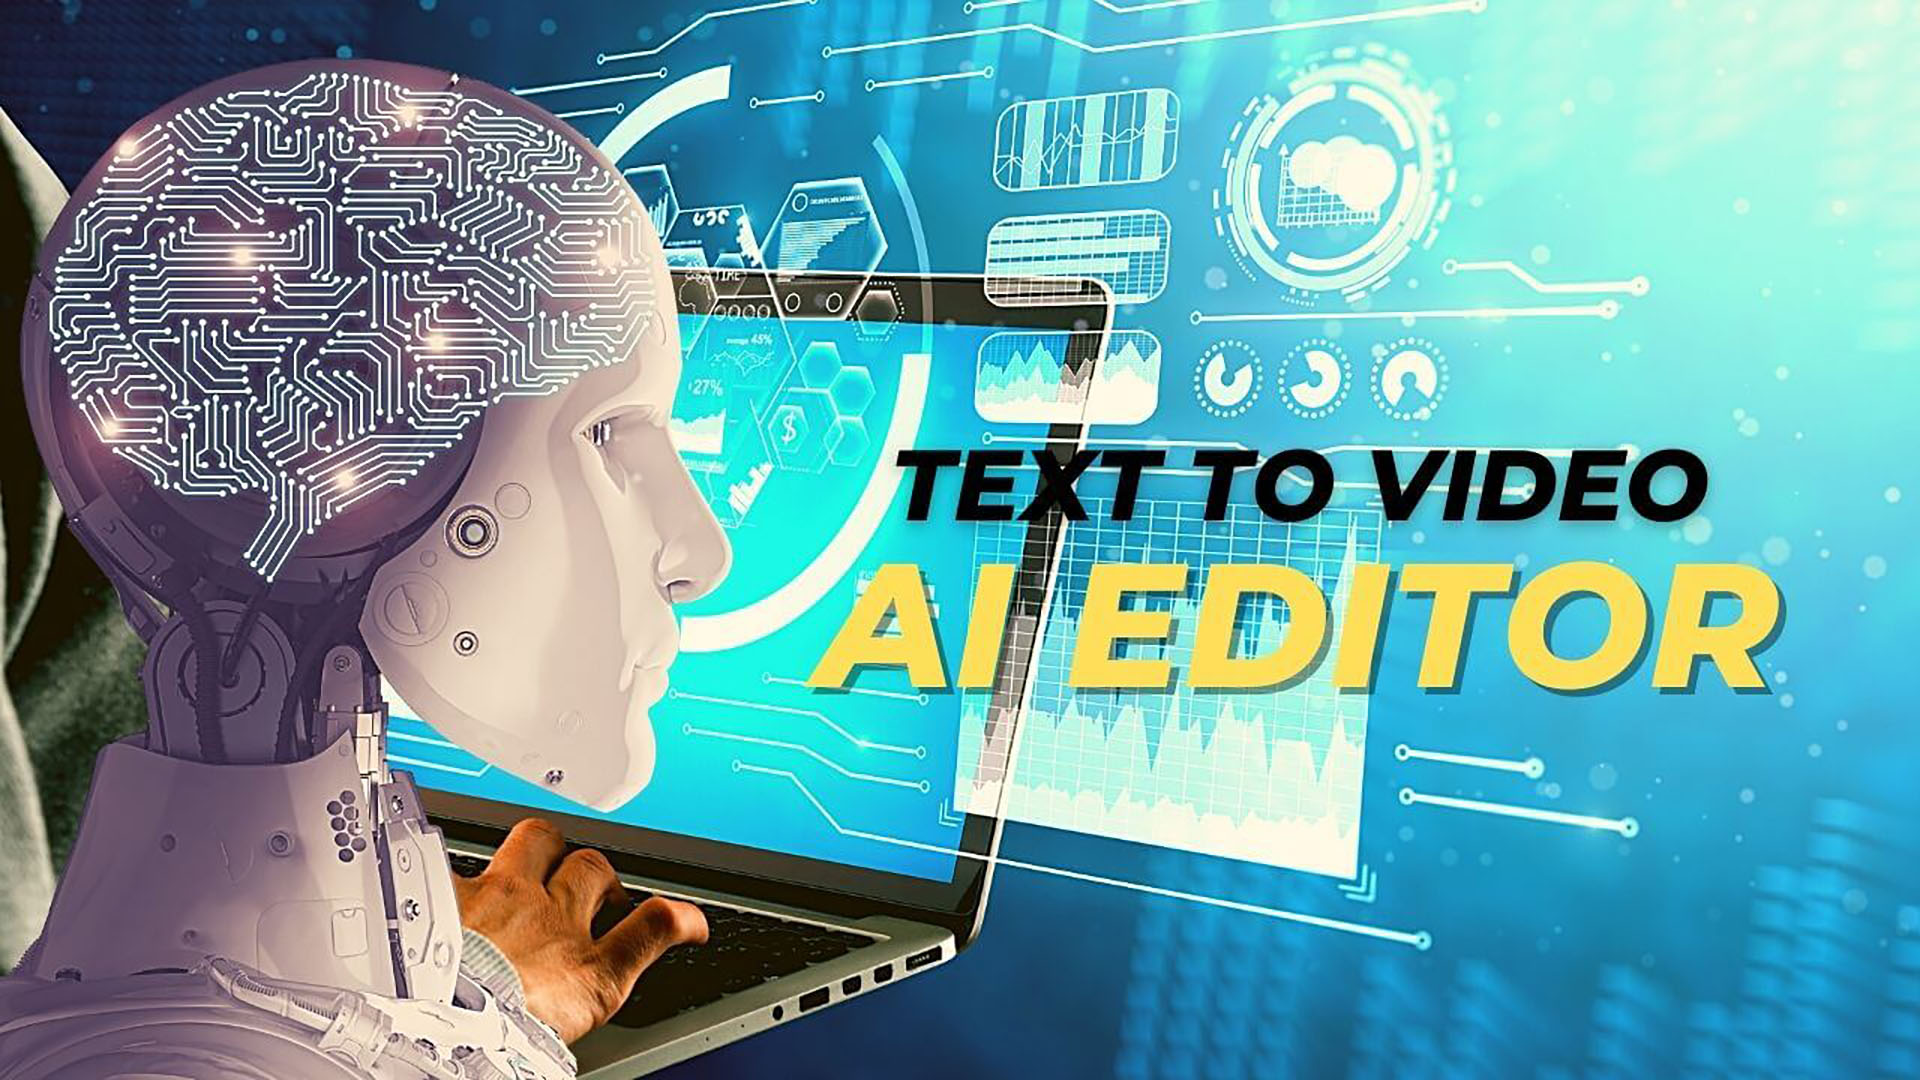 image of robot and text to video AI editor title in blog post by Fullframe Creative in Geneva